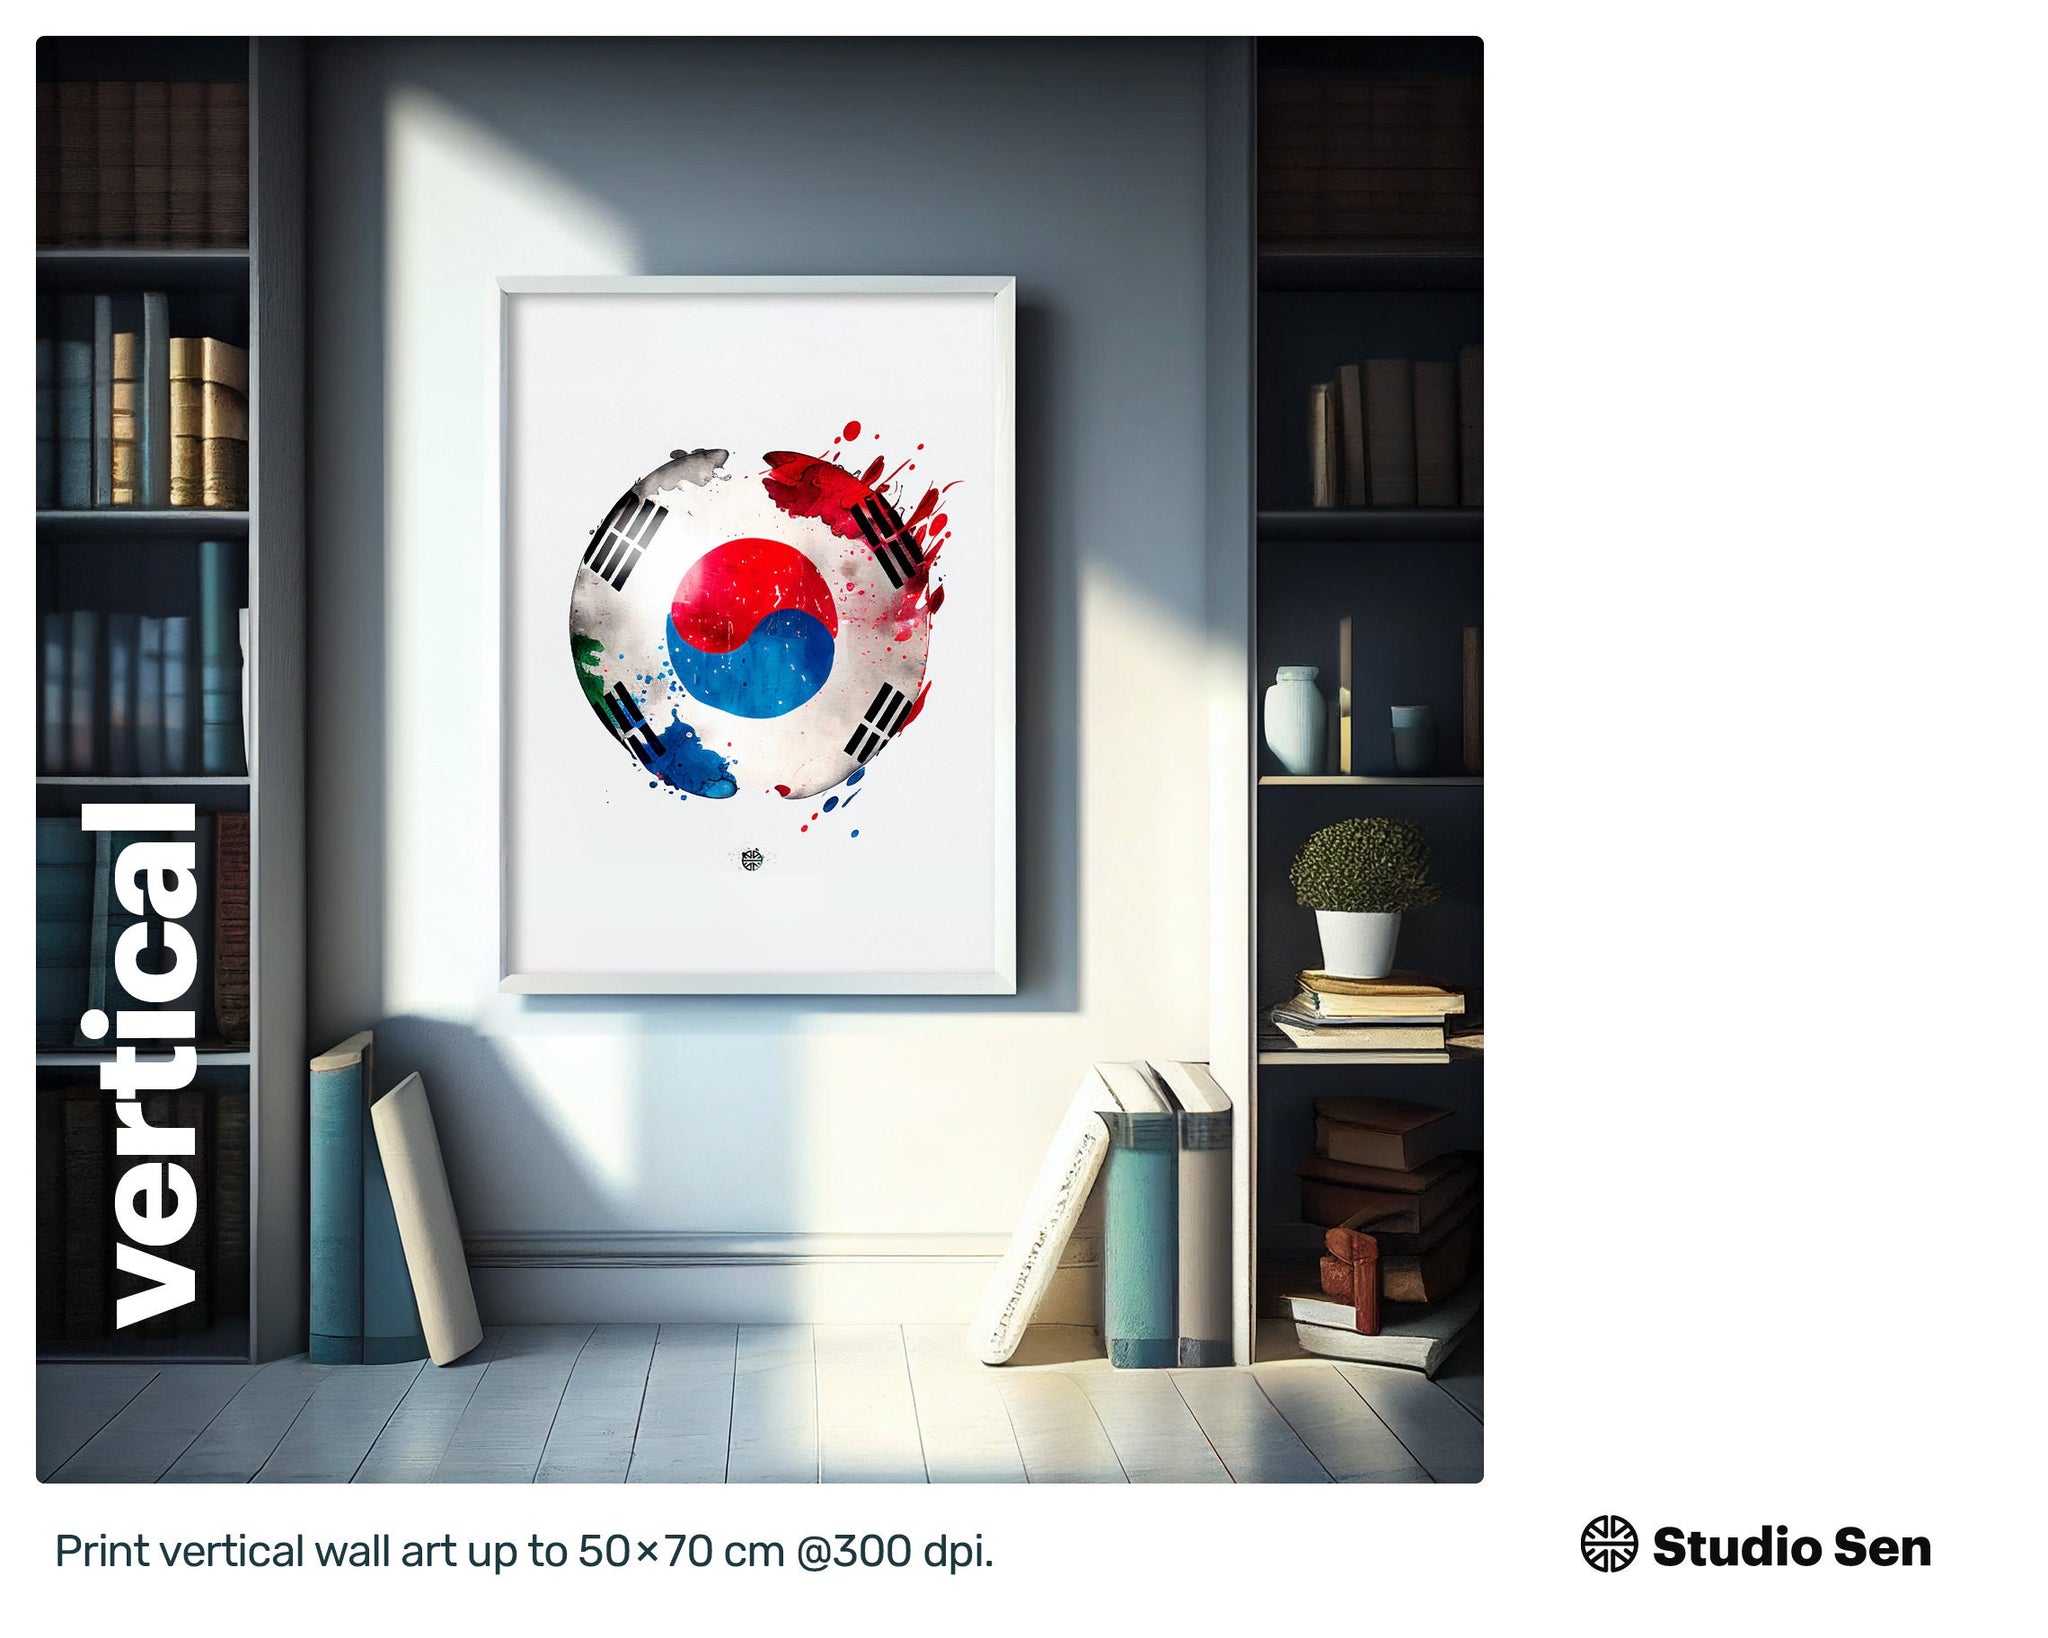 Majestic Luminous South Korean flag, Soothing Admired Screen print, Vivacious Outstanding Lovely Uplifting Kaleidoscopic Acrylic print